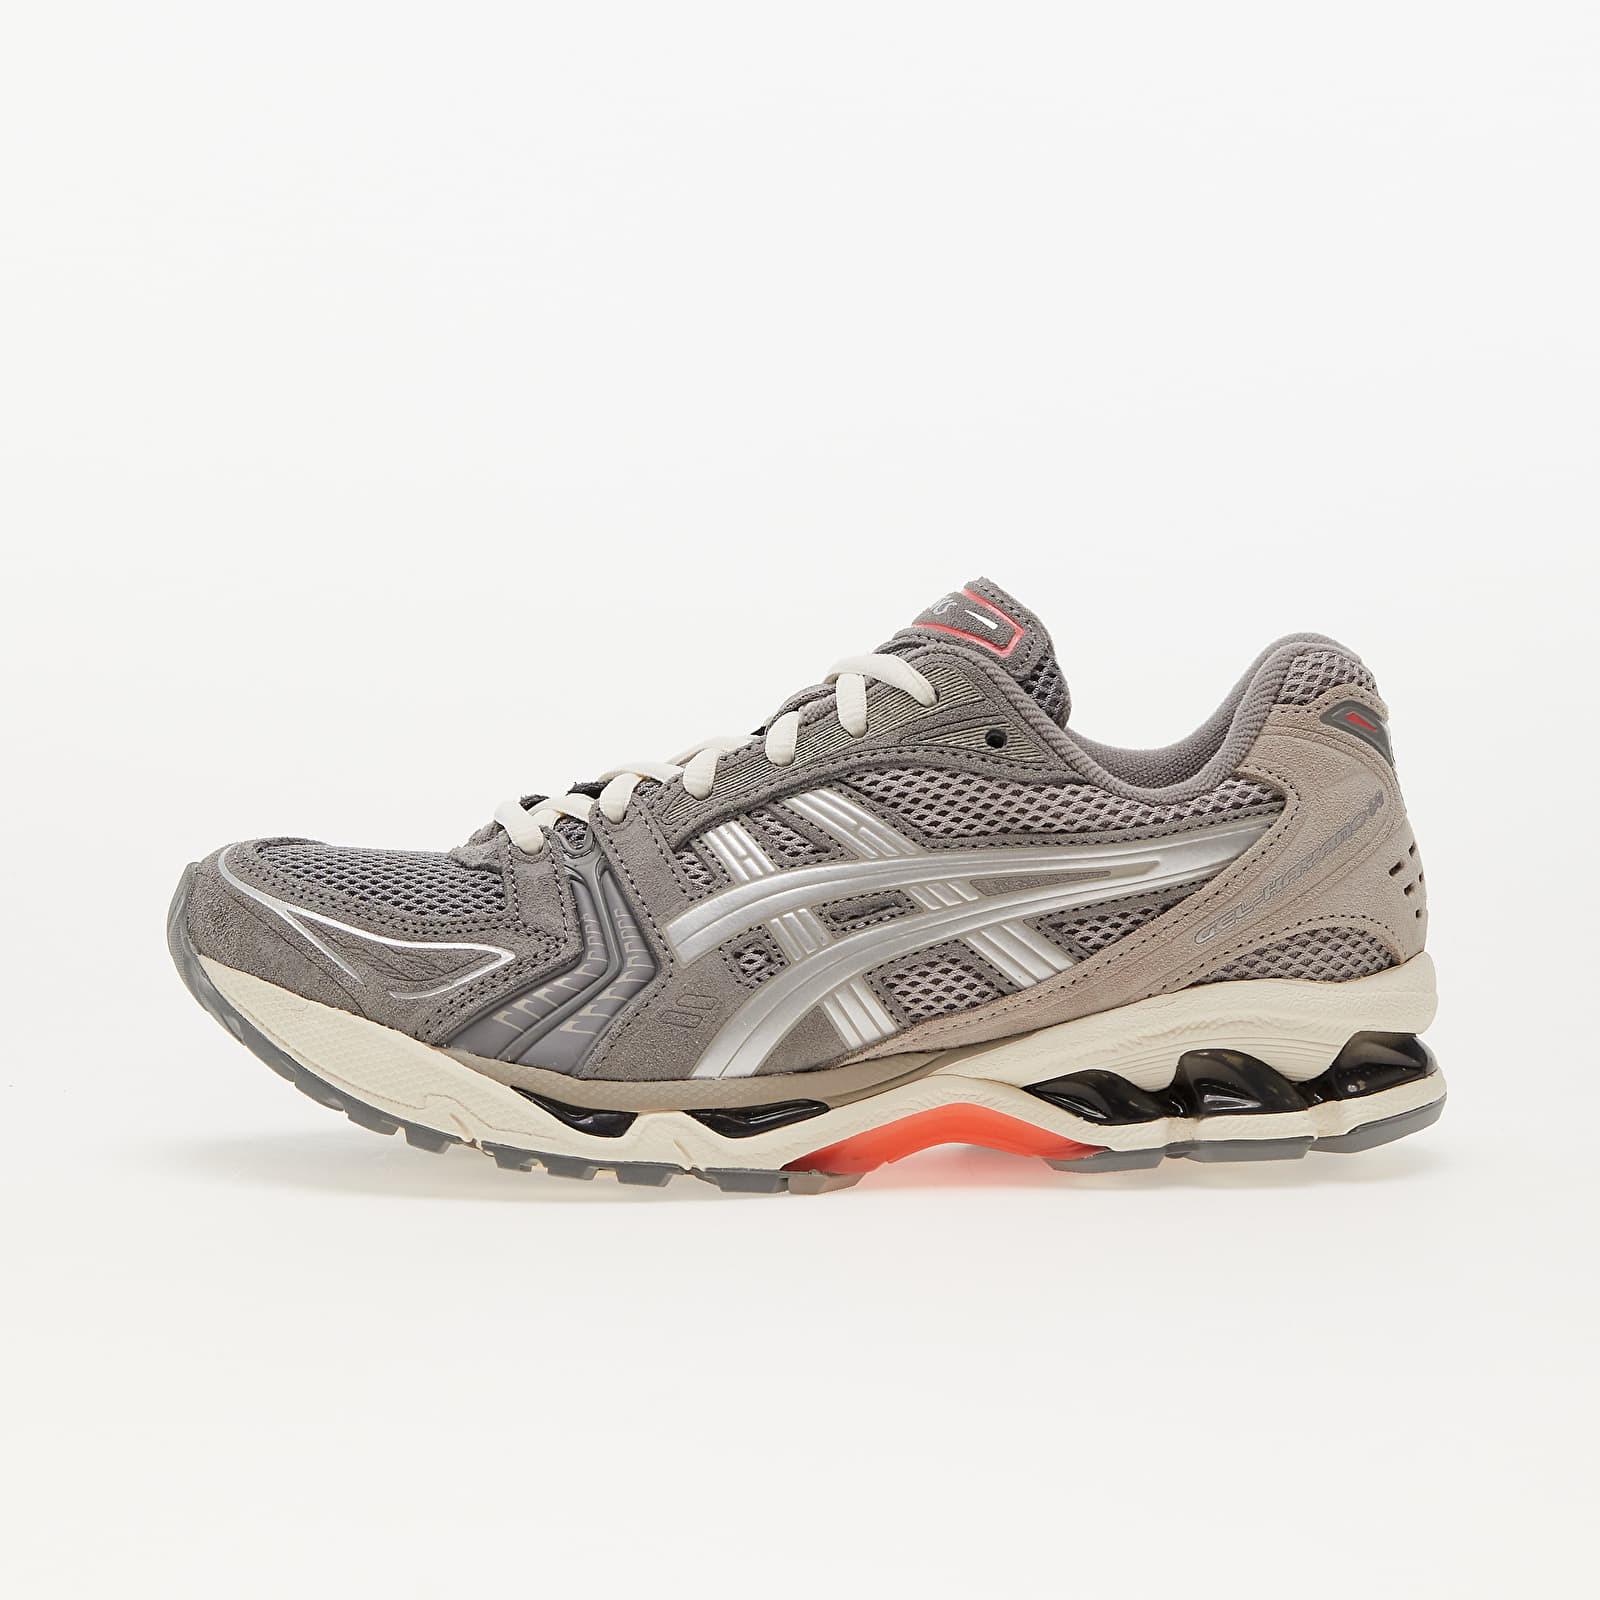 Gel-kayano 14 Clay Pure Silver in Gray for Lyst